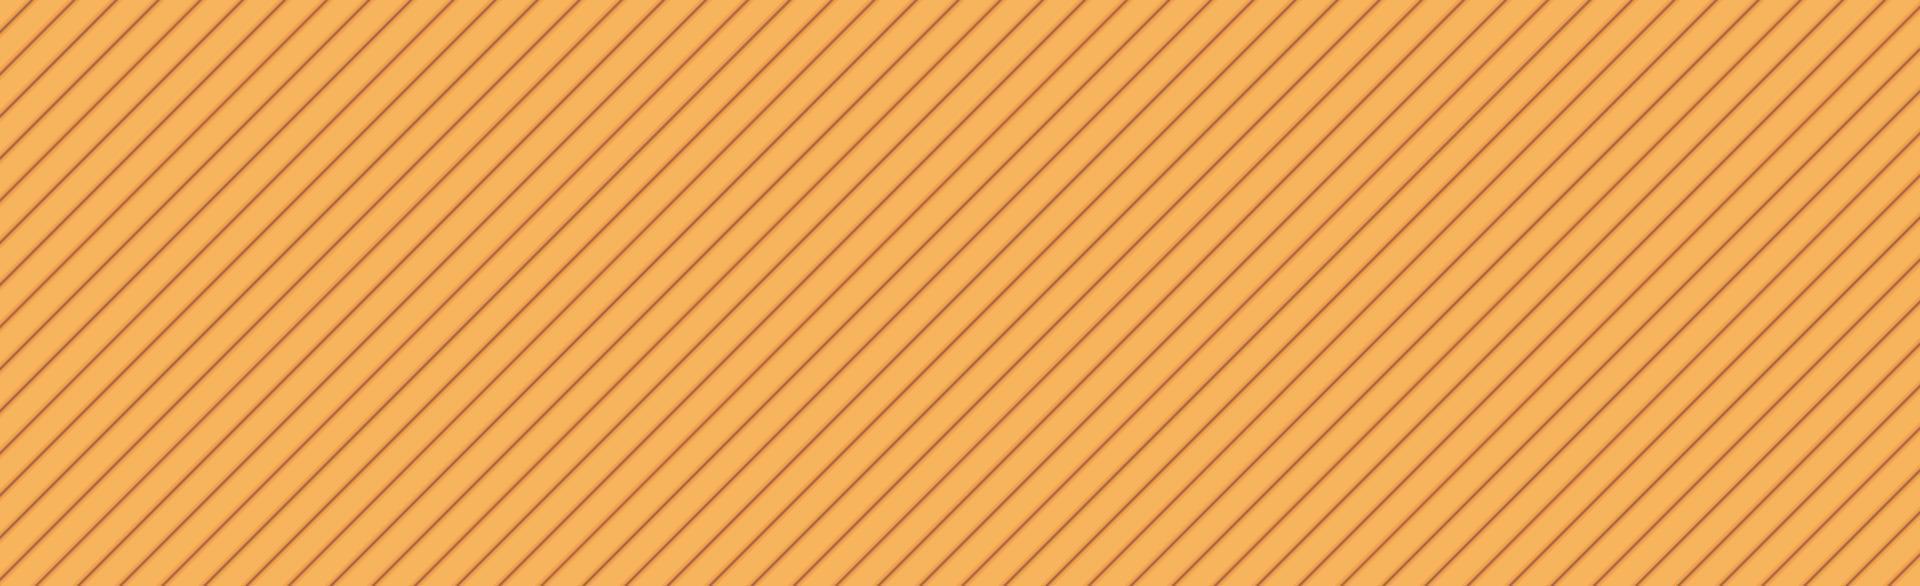 Panoramic abstract yellow-orange texture background slanted lines - Vector